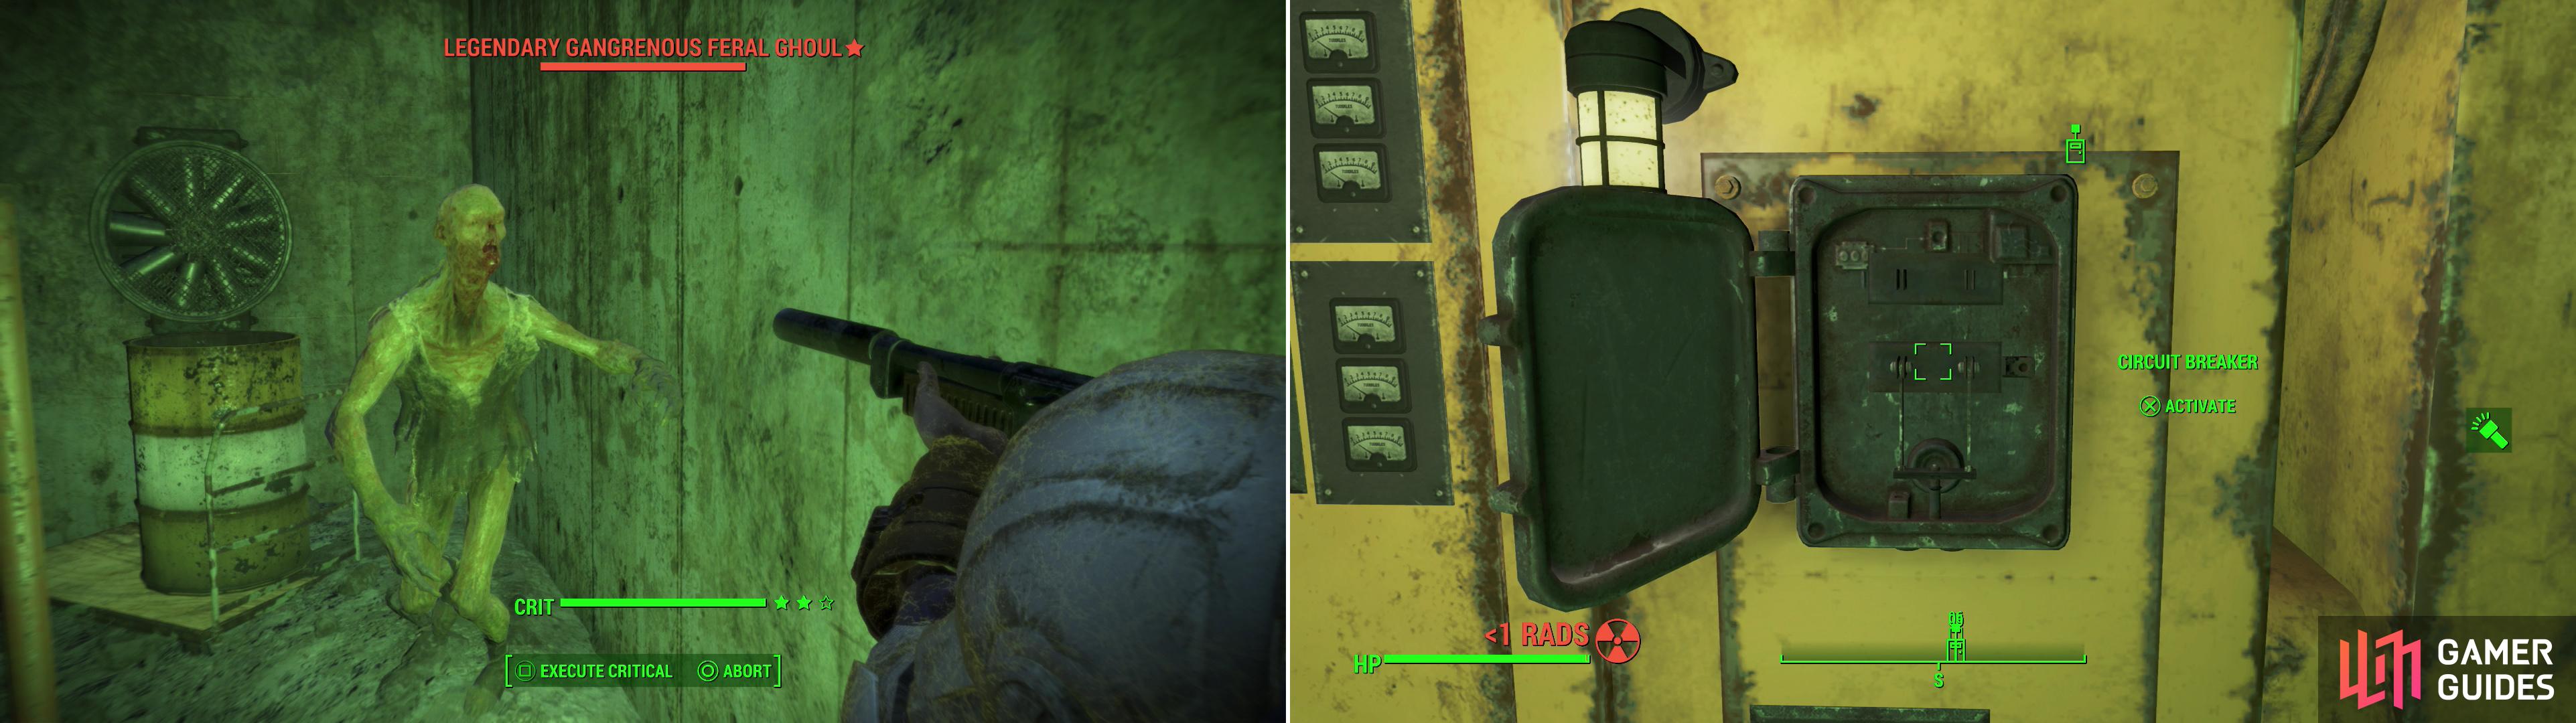 Heavily irradiated, you can of course expect to find Feral Ghouls around the Mass Fusion Containment Shed (left). Find a circuit breaker and turn off the Automated Radio Alarm (right).